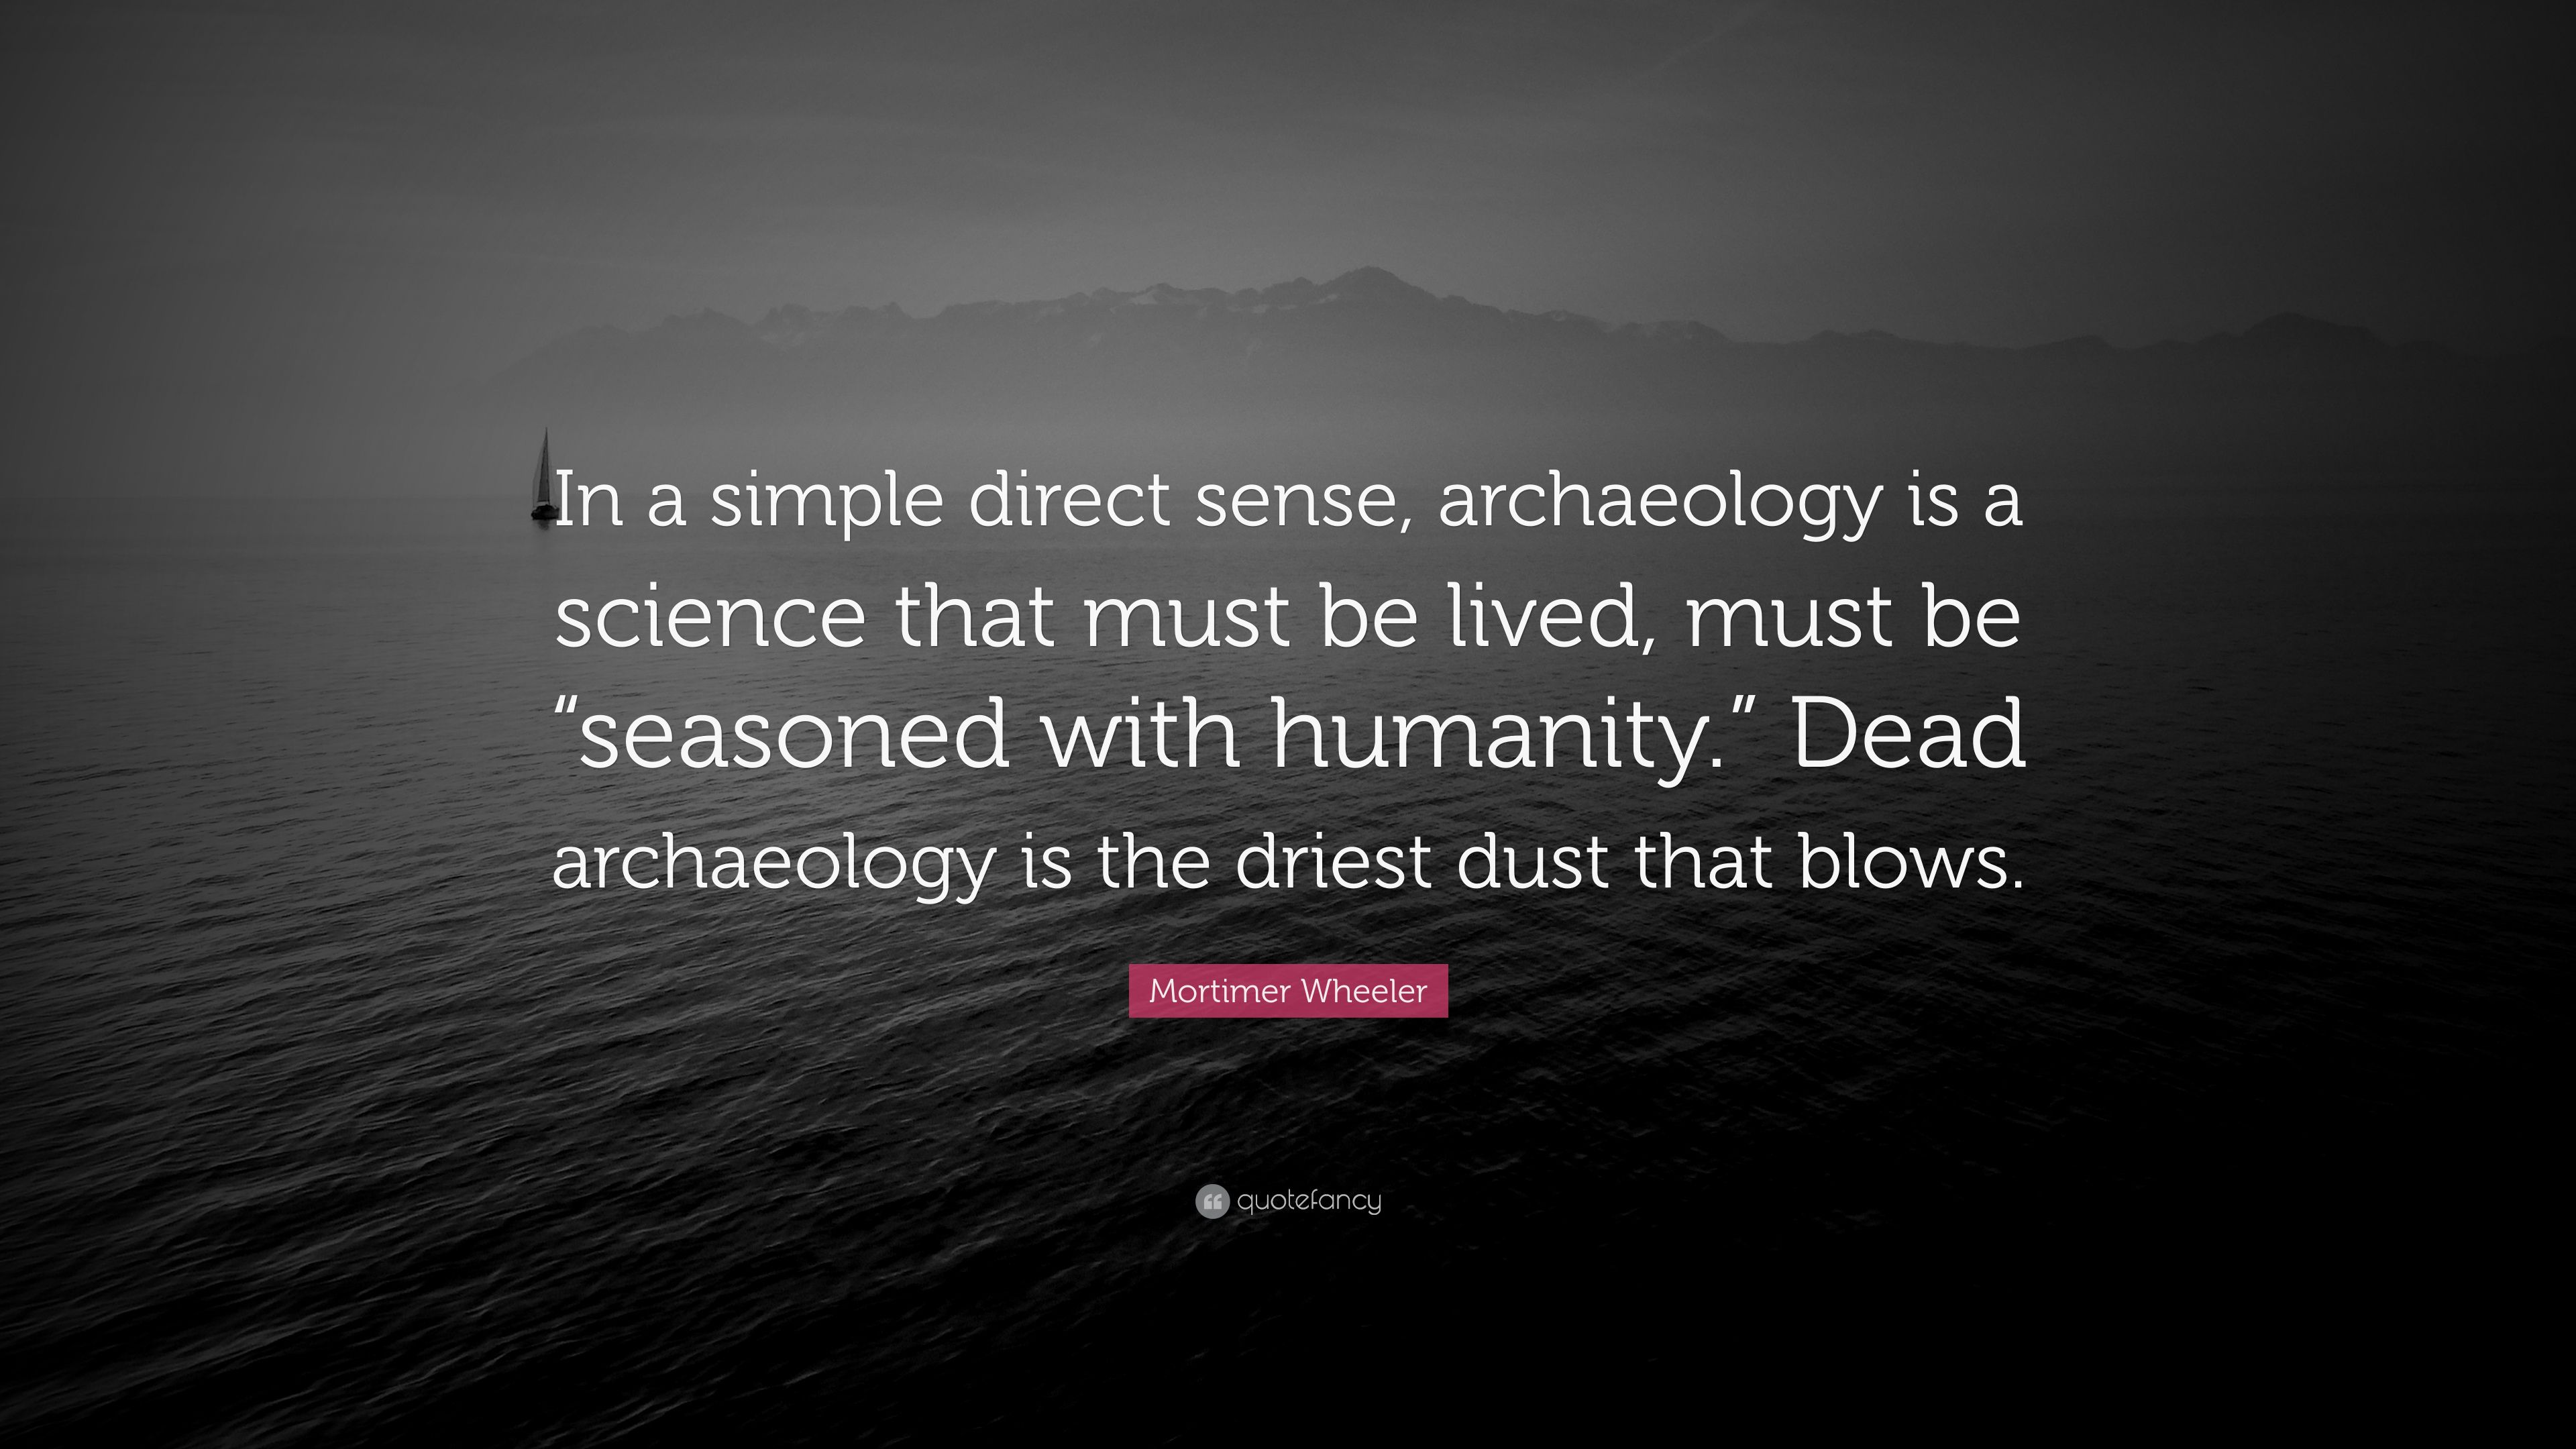 Mortimer Wheeler Quote: “In a simple direct sense, archaeology is